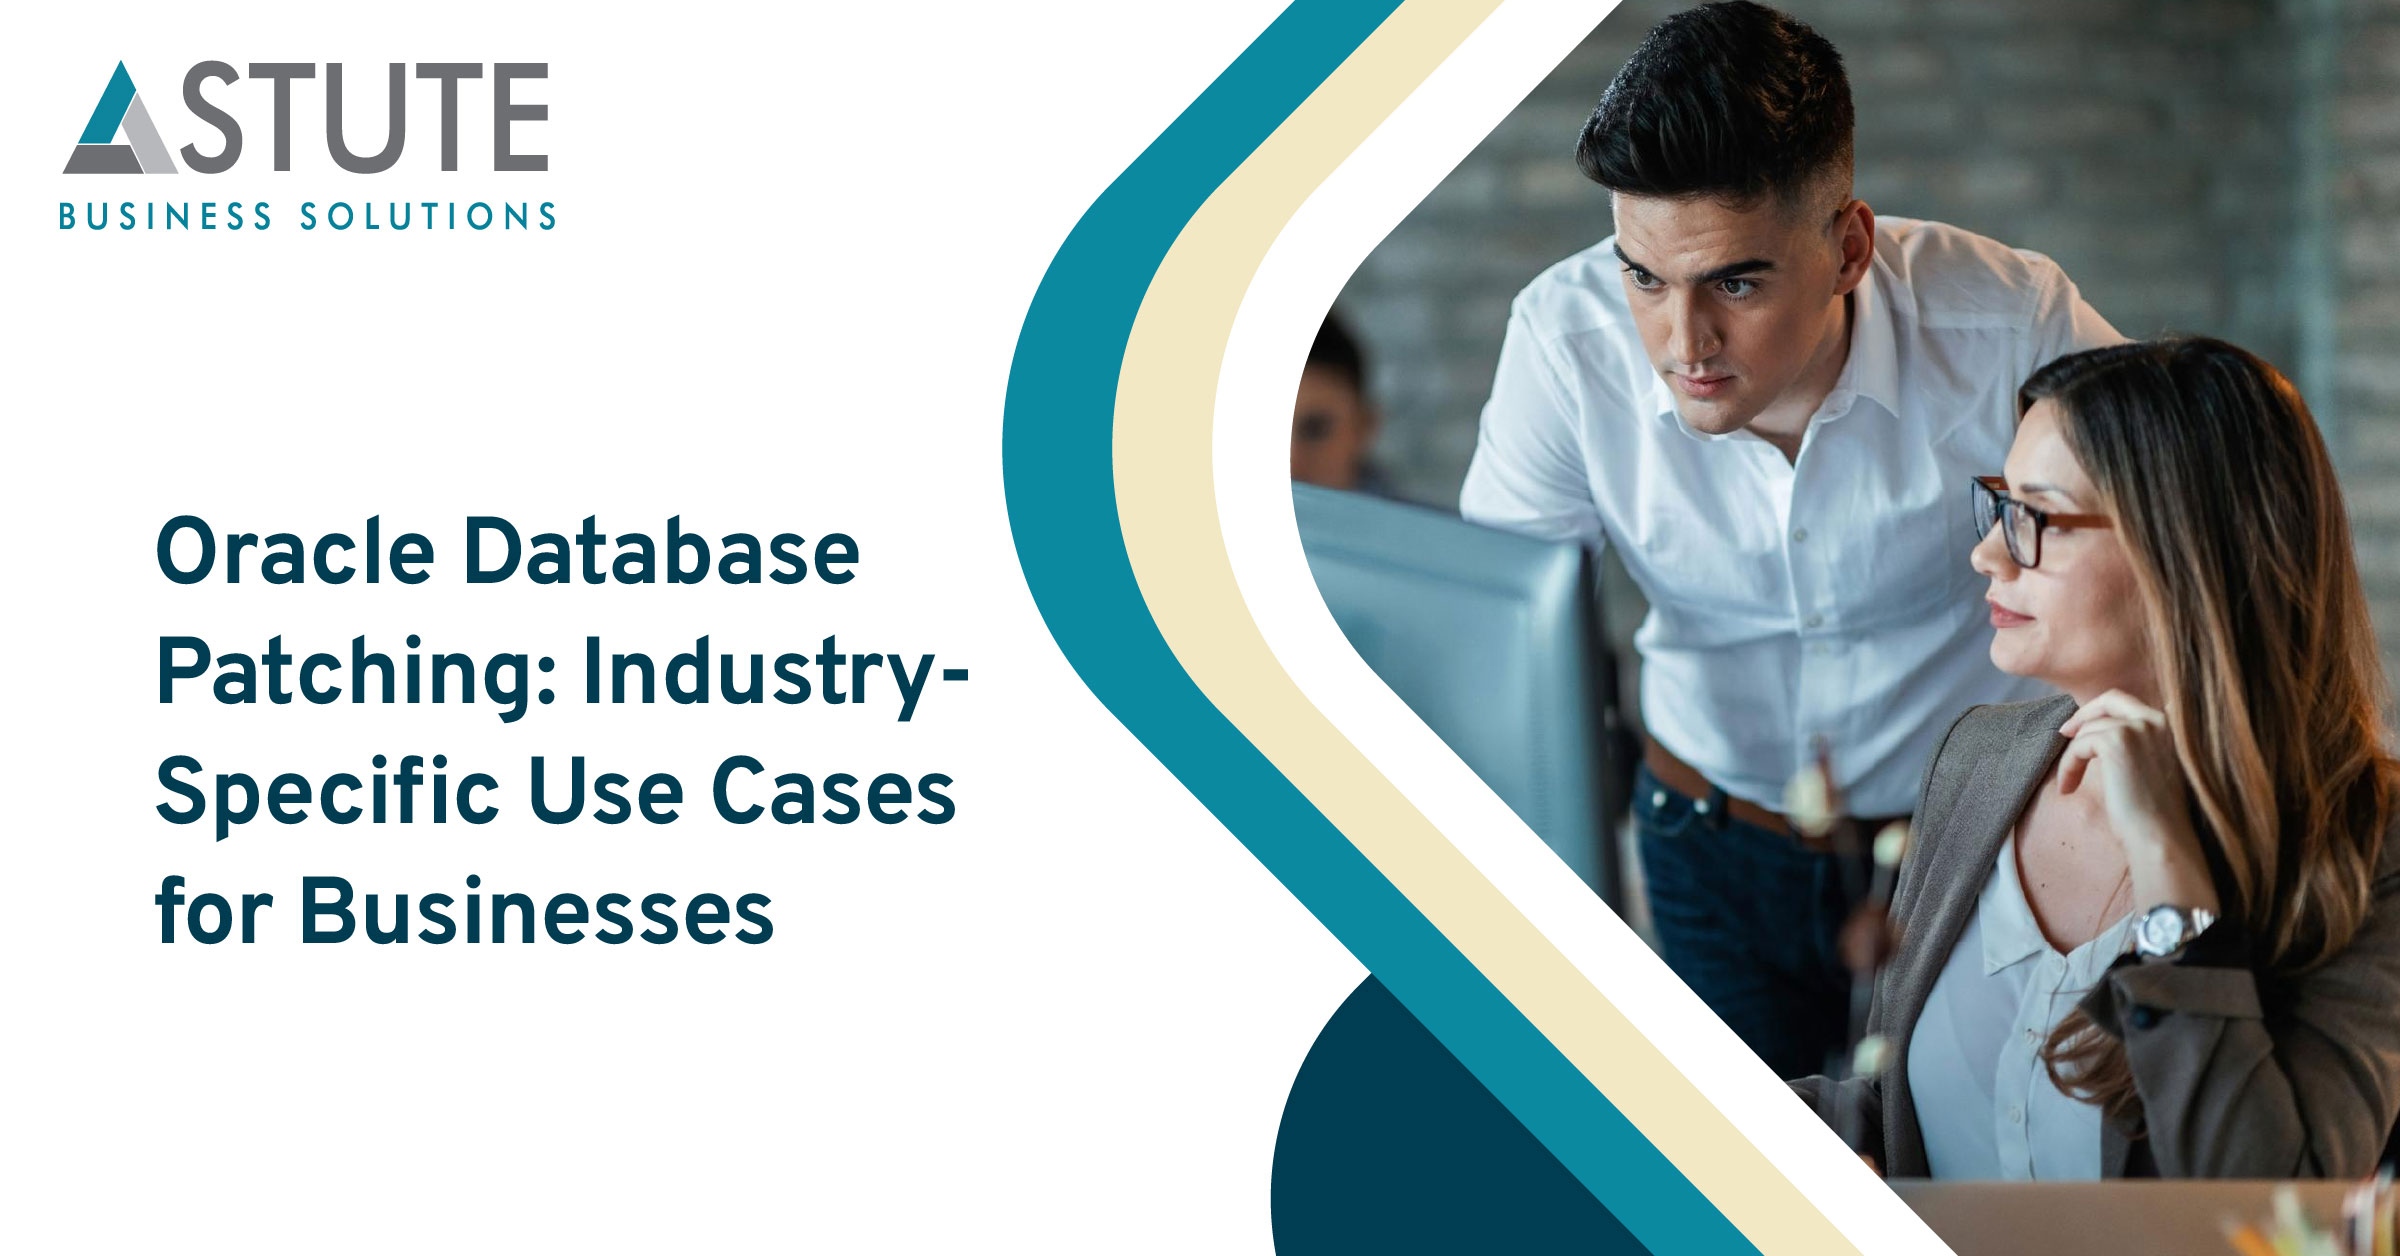 Oracle Database Patching: Industry-Specific Use Cases for